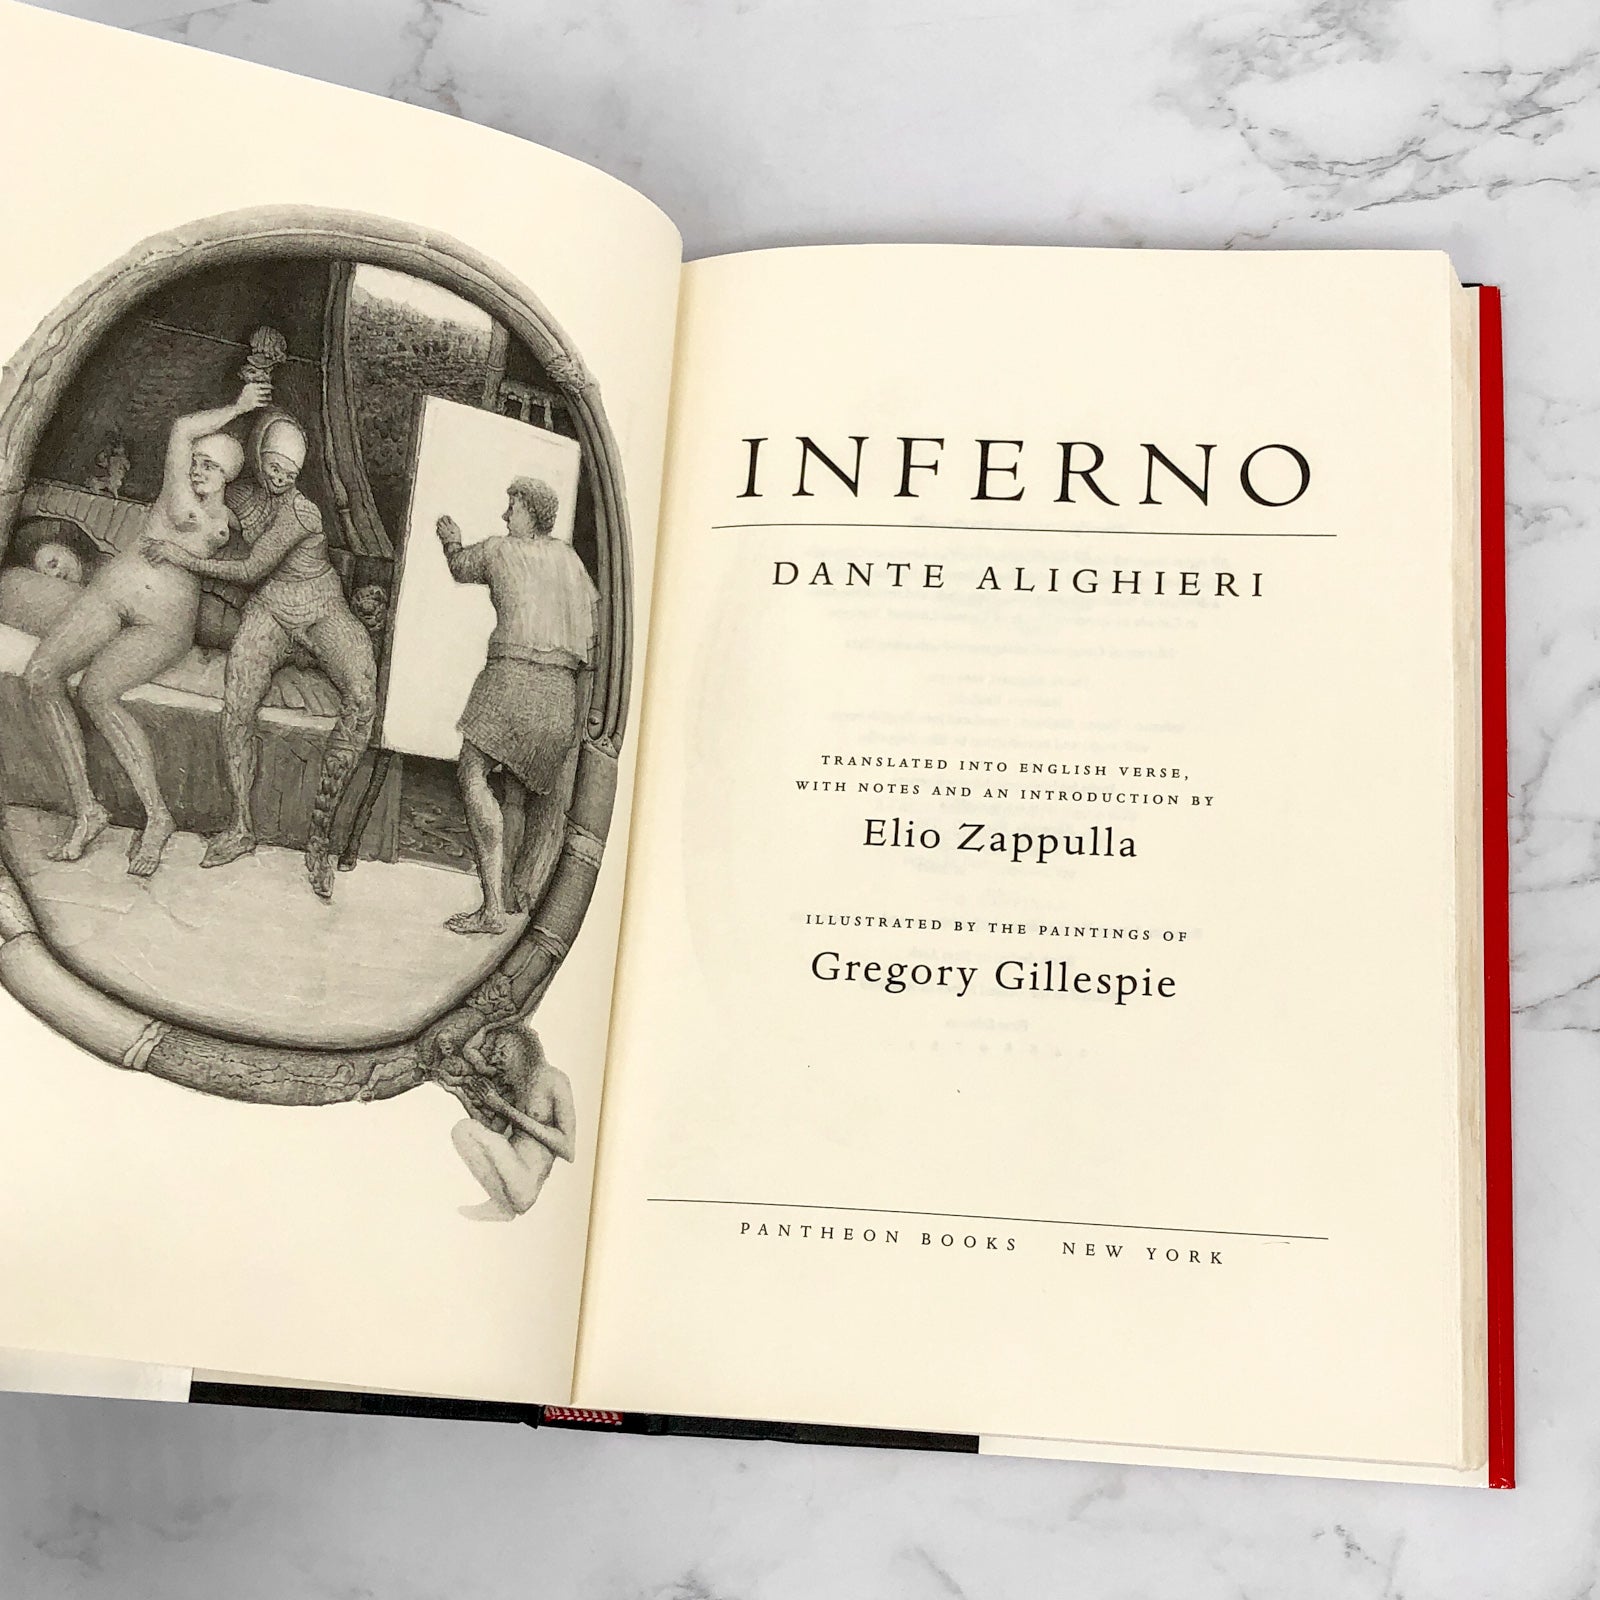 Inferno: Illustrated Edition|Hardcover